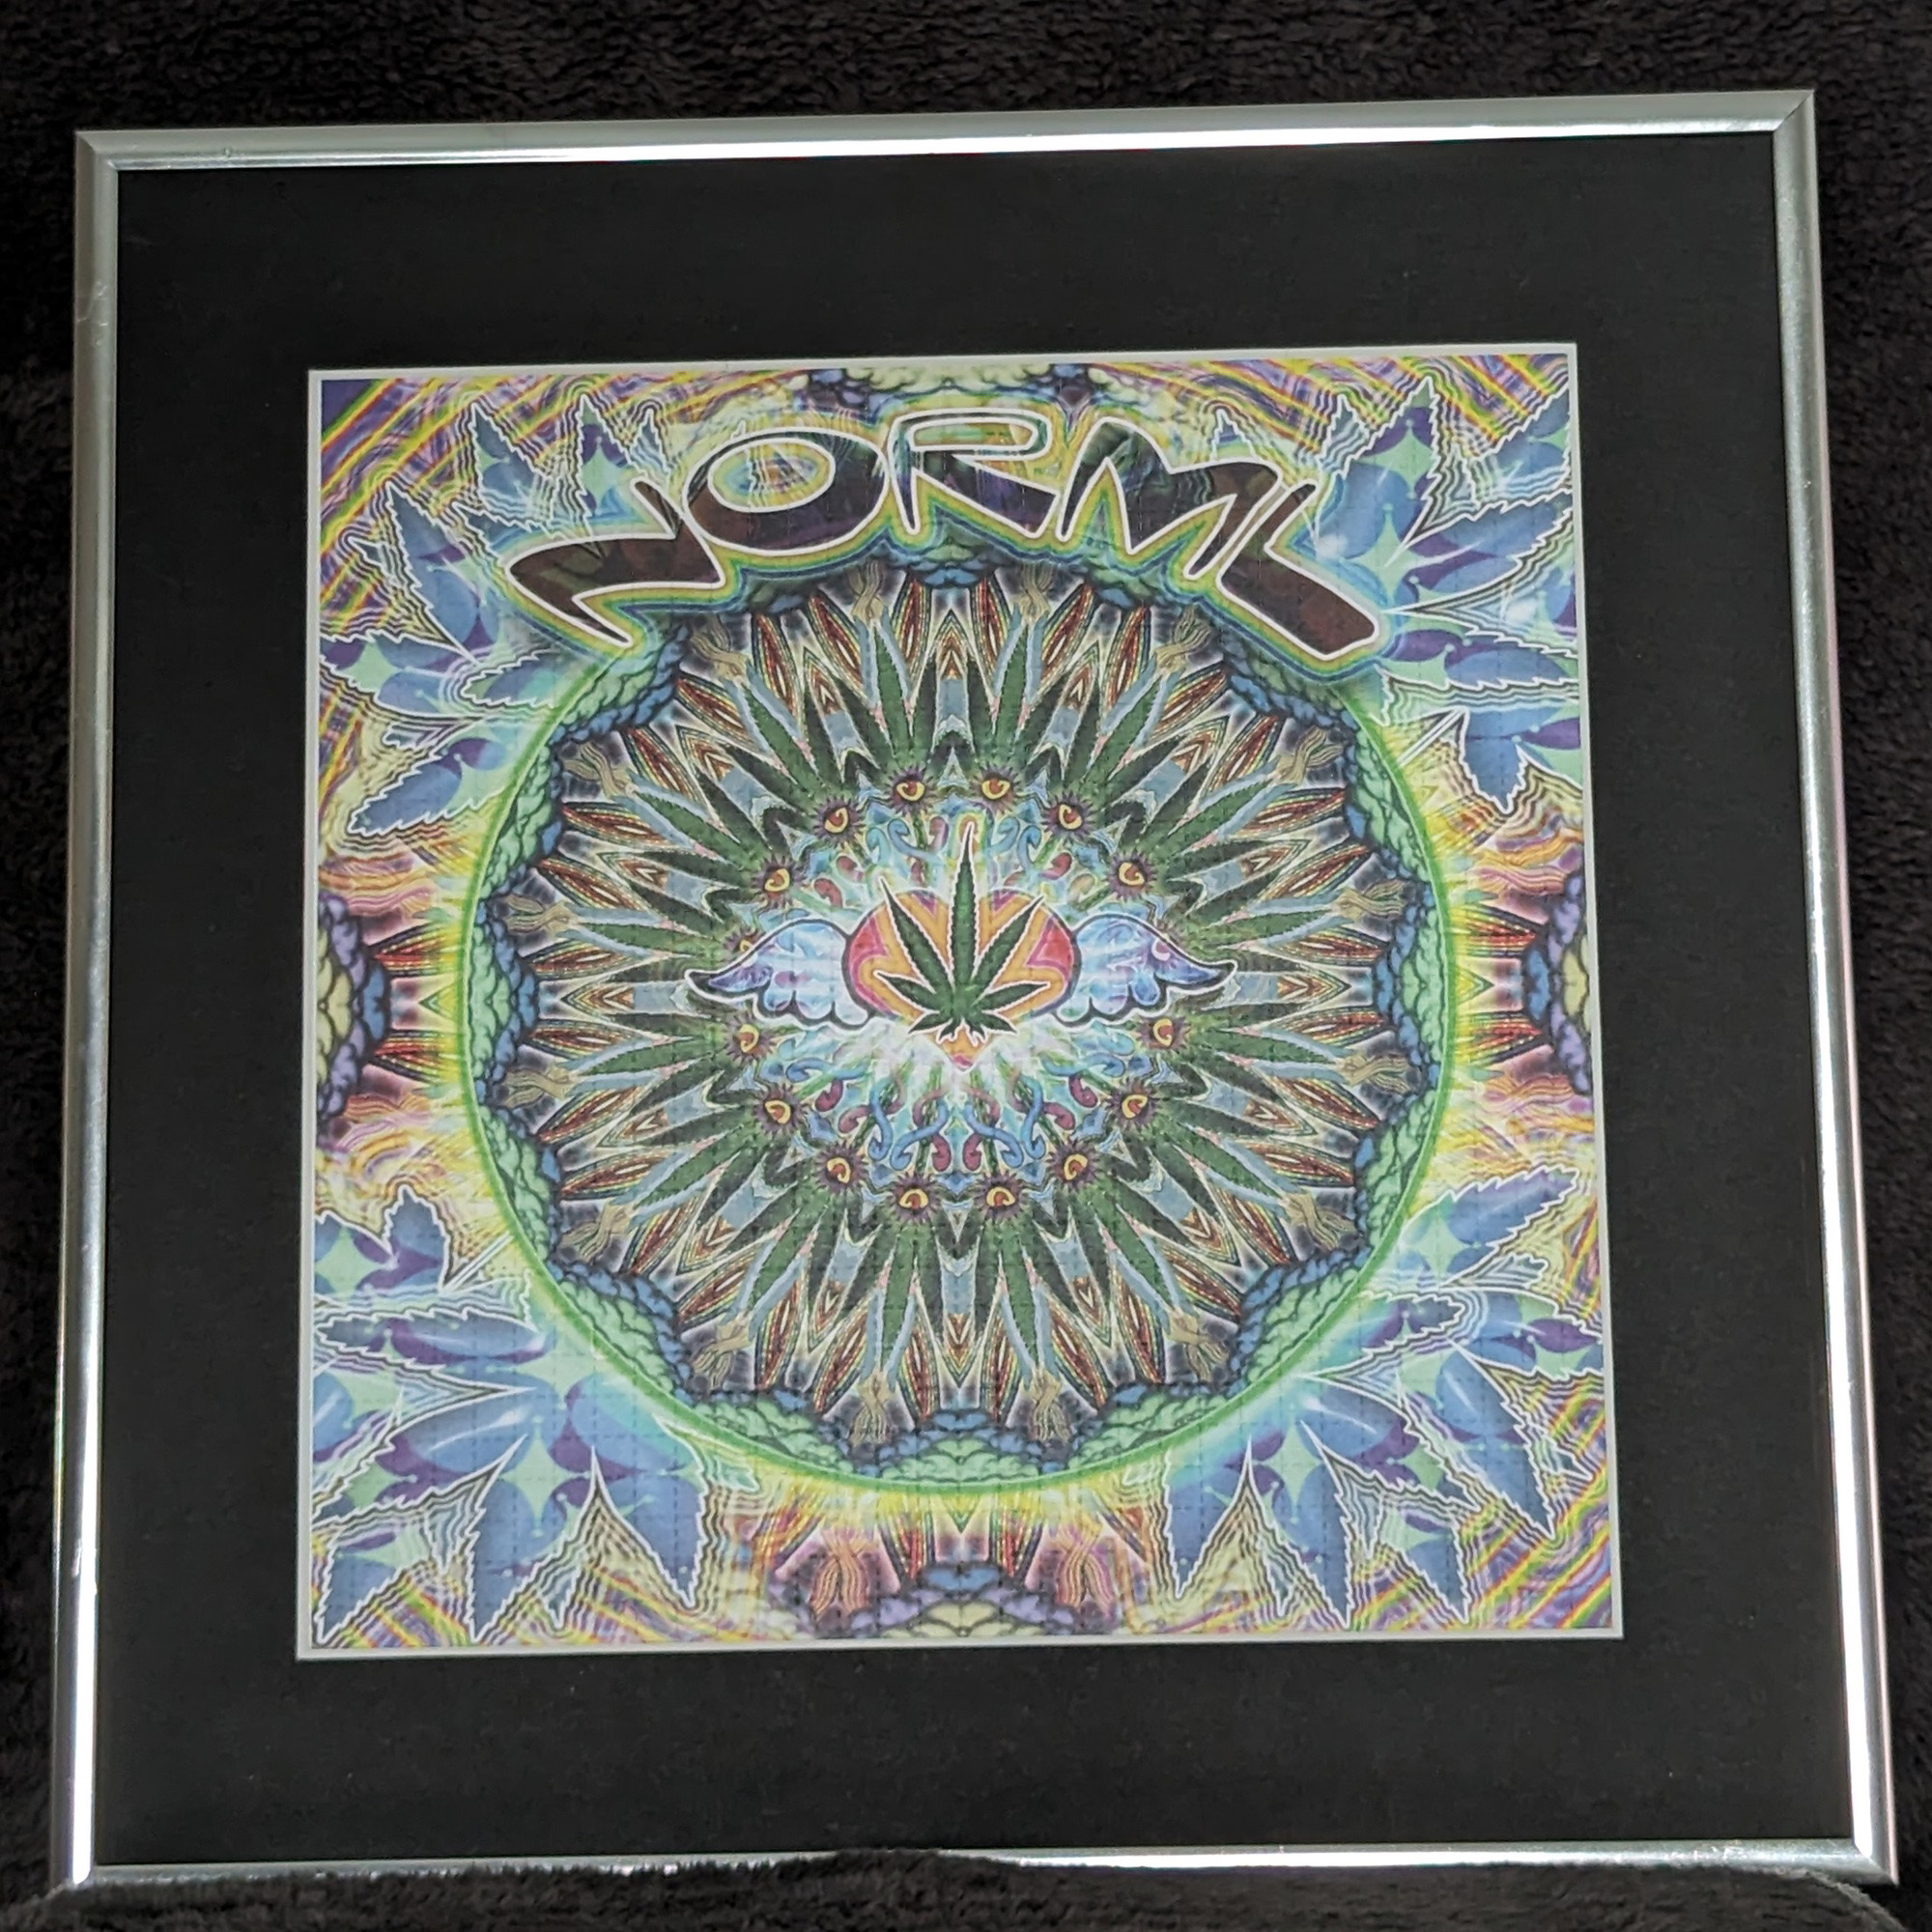 Just an example of how cool this unsigned blotter art looks when it's framed.